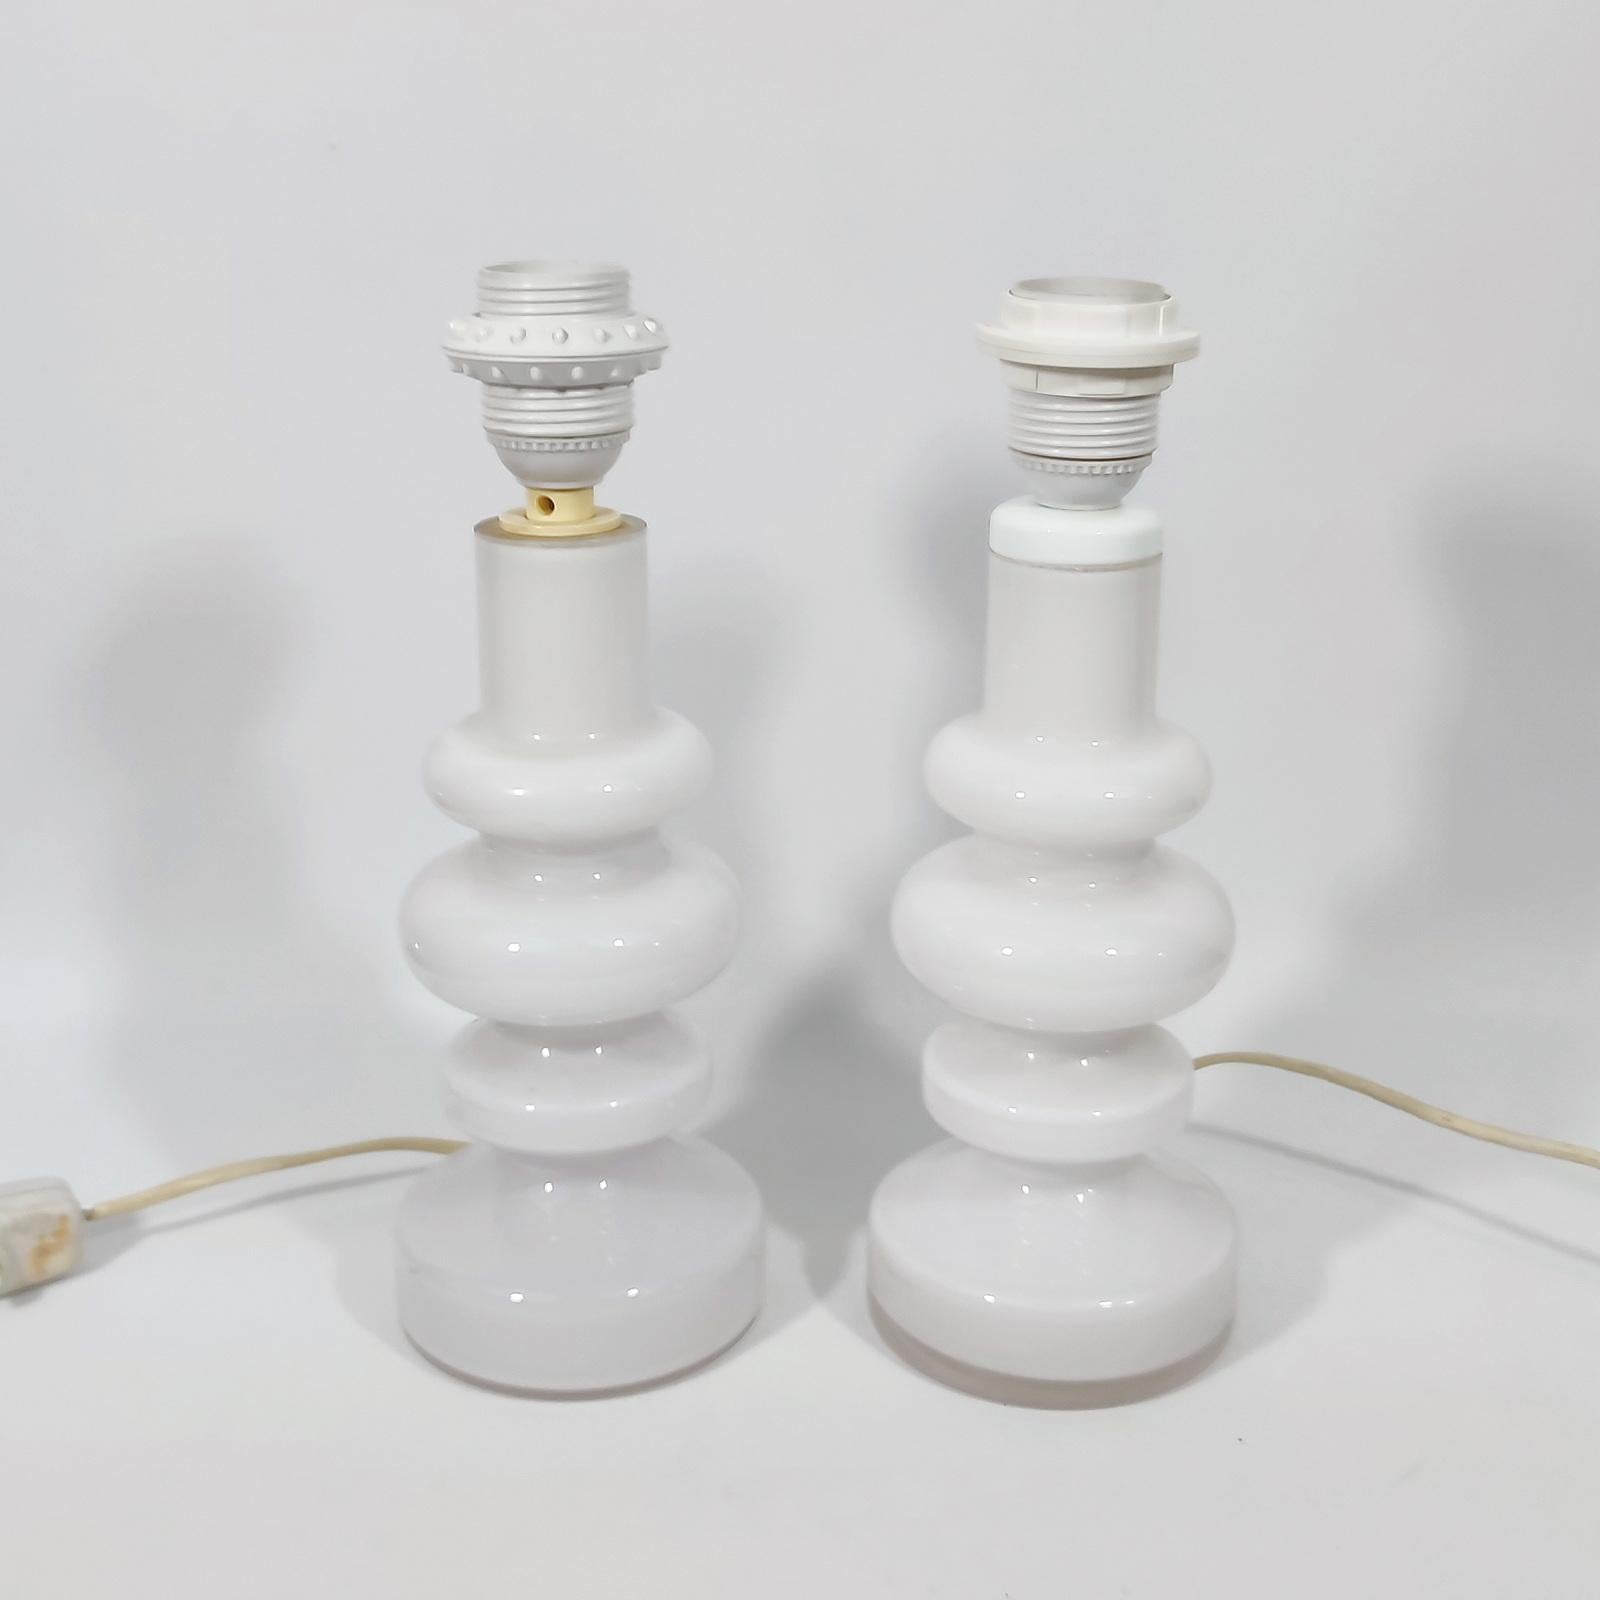 Rare find! Two milky white glass table lamps designed by Gunnar Ander for Lindshammar, Swedish late 1960's.
In original condition. No chips or other damages.
Shades are not included.
Equipped ith 2 E27 sockets, working in the US too with 110 V light